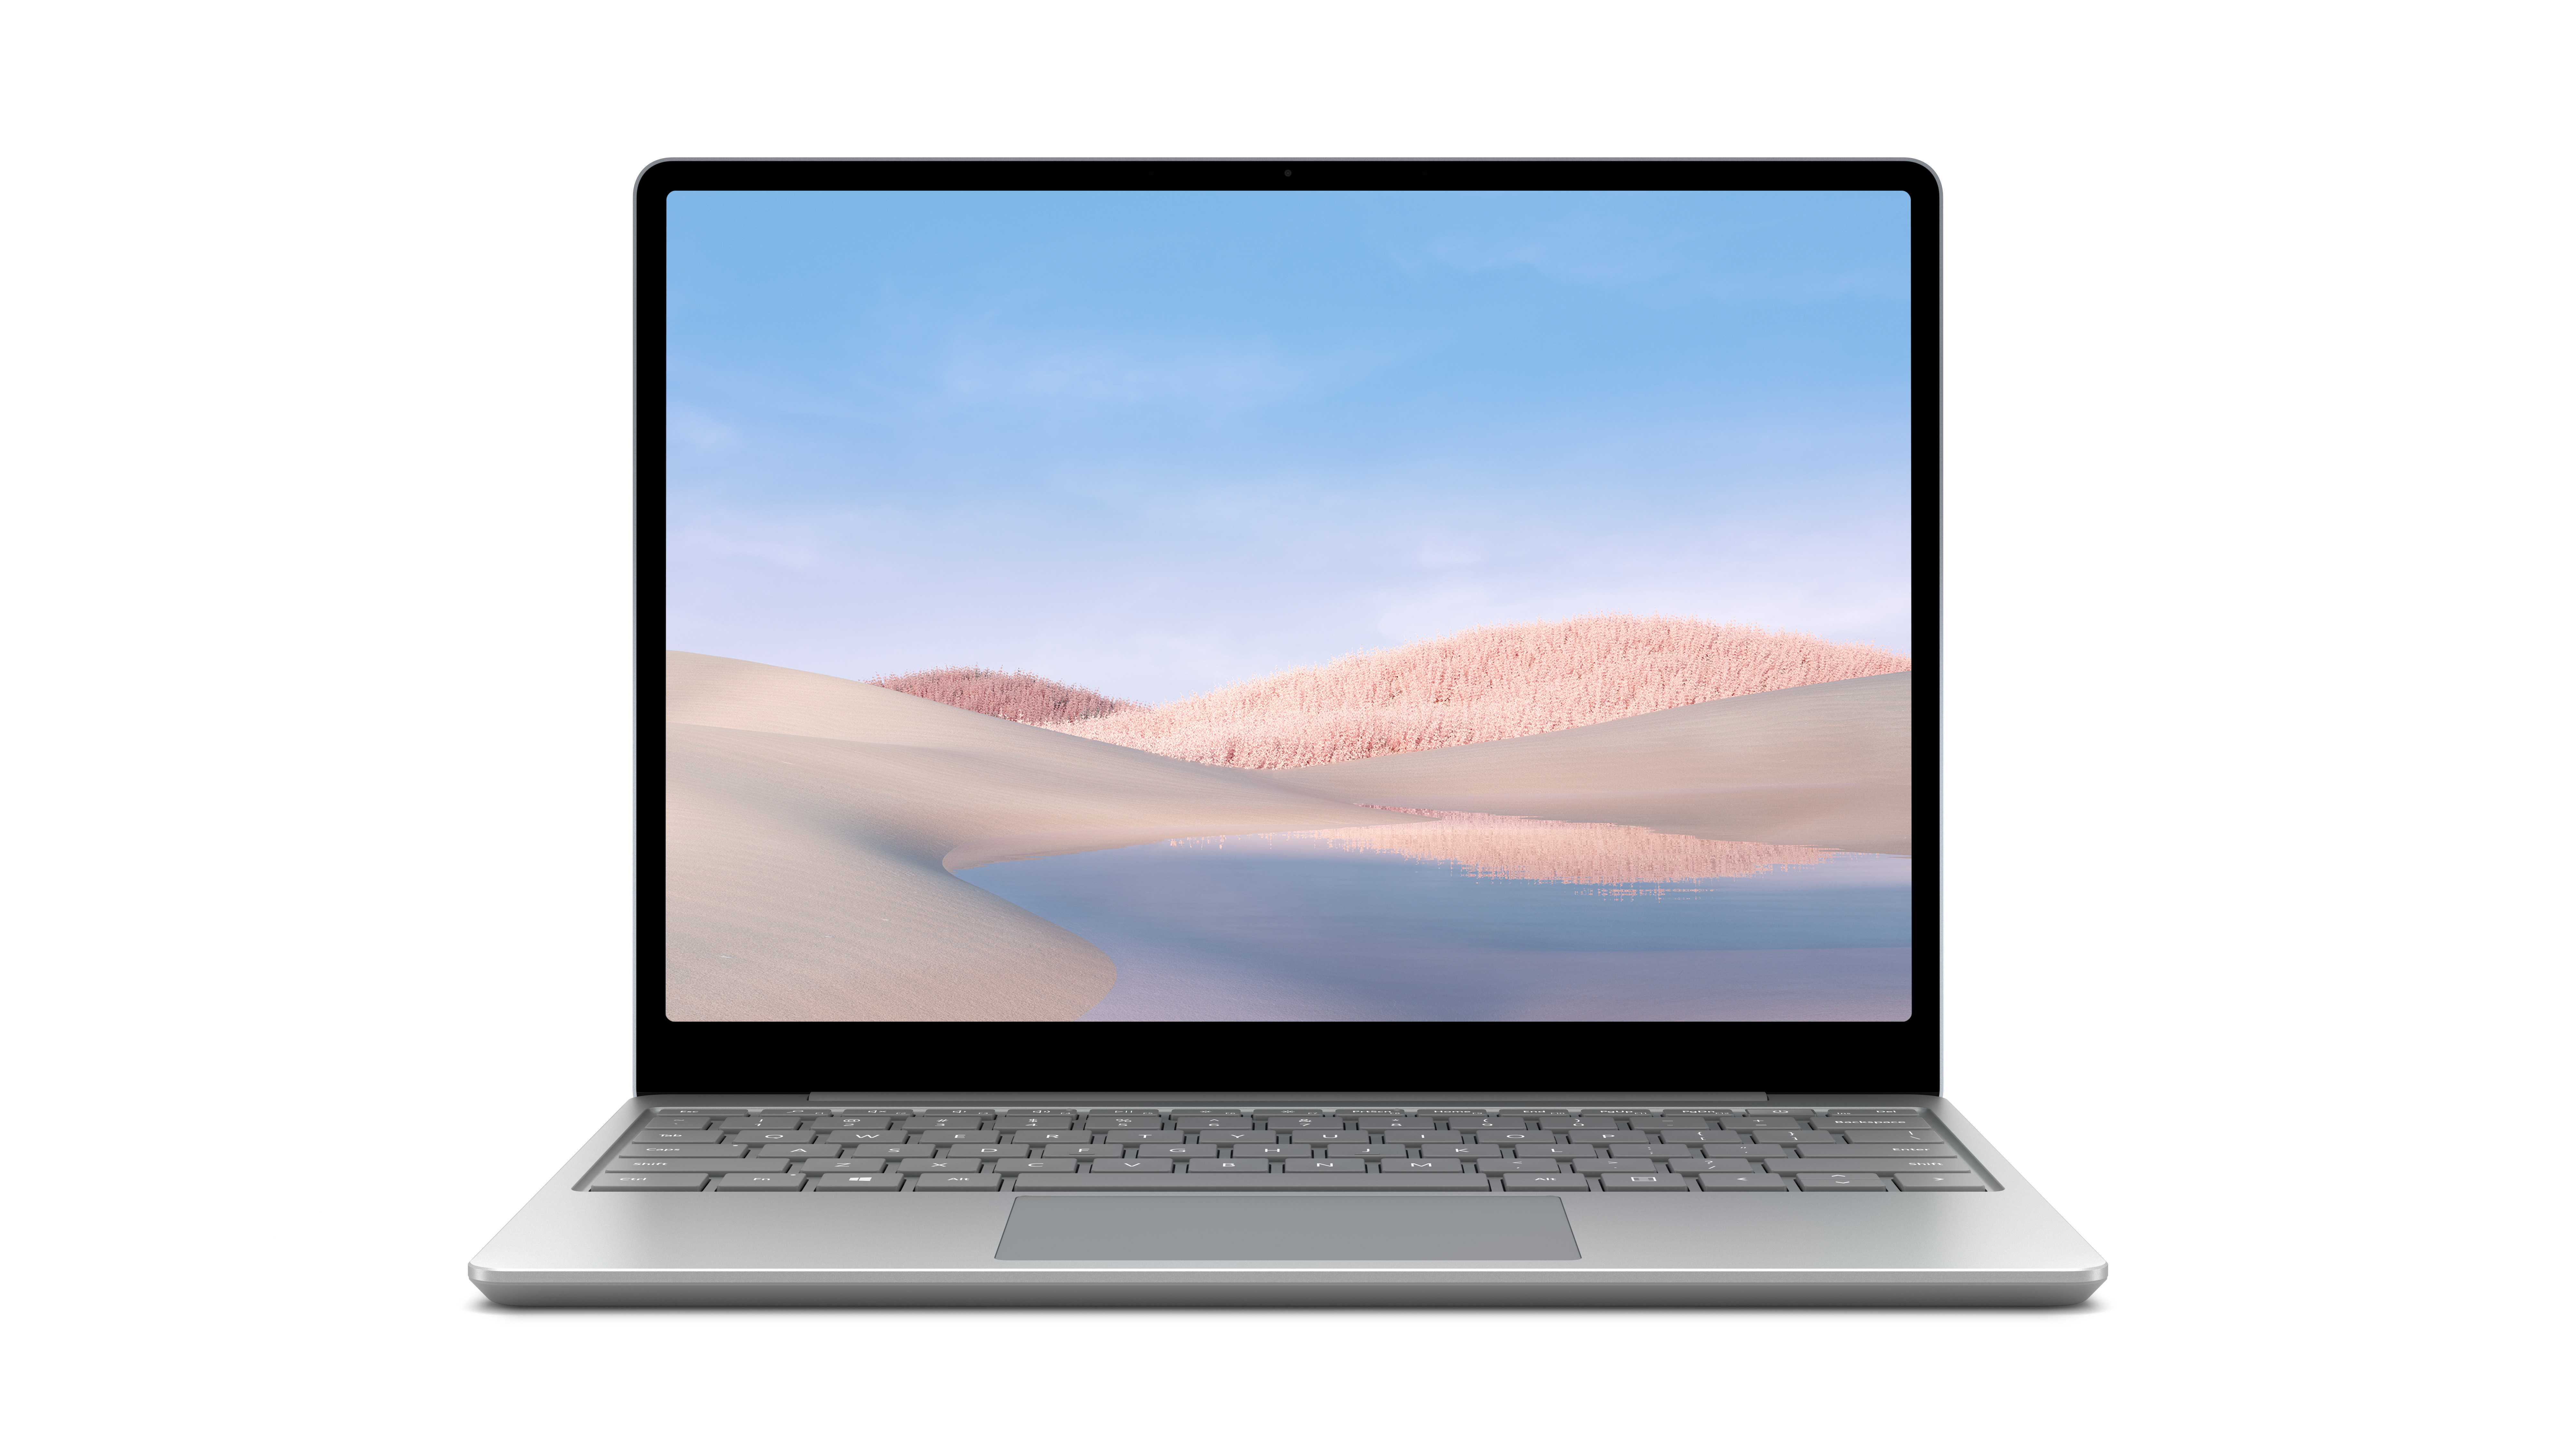 Microsoft Surface Laptop Go i5-1035G1 4GB 64GB eMMC 12.4 Touch W10 Home S Platinum